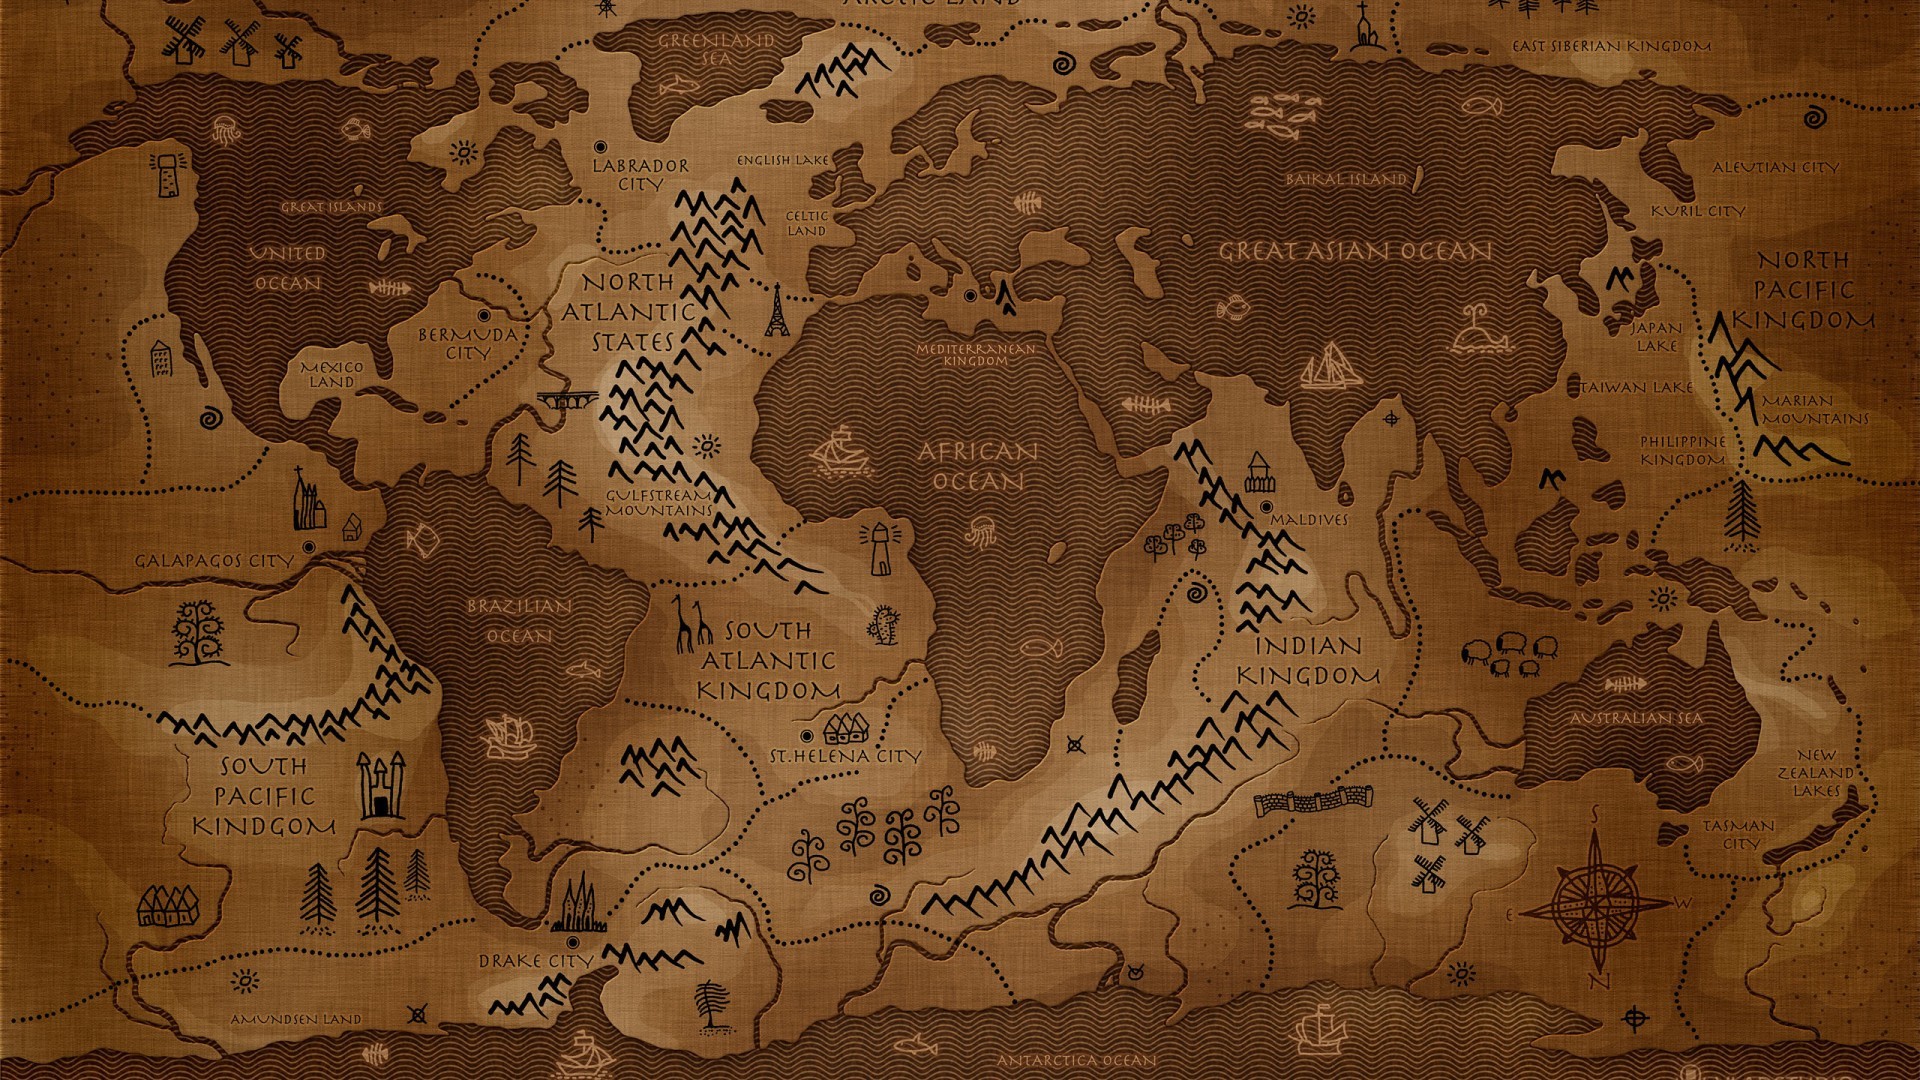 game of thrones map wallpaper 1920x1080